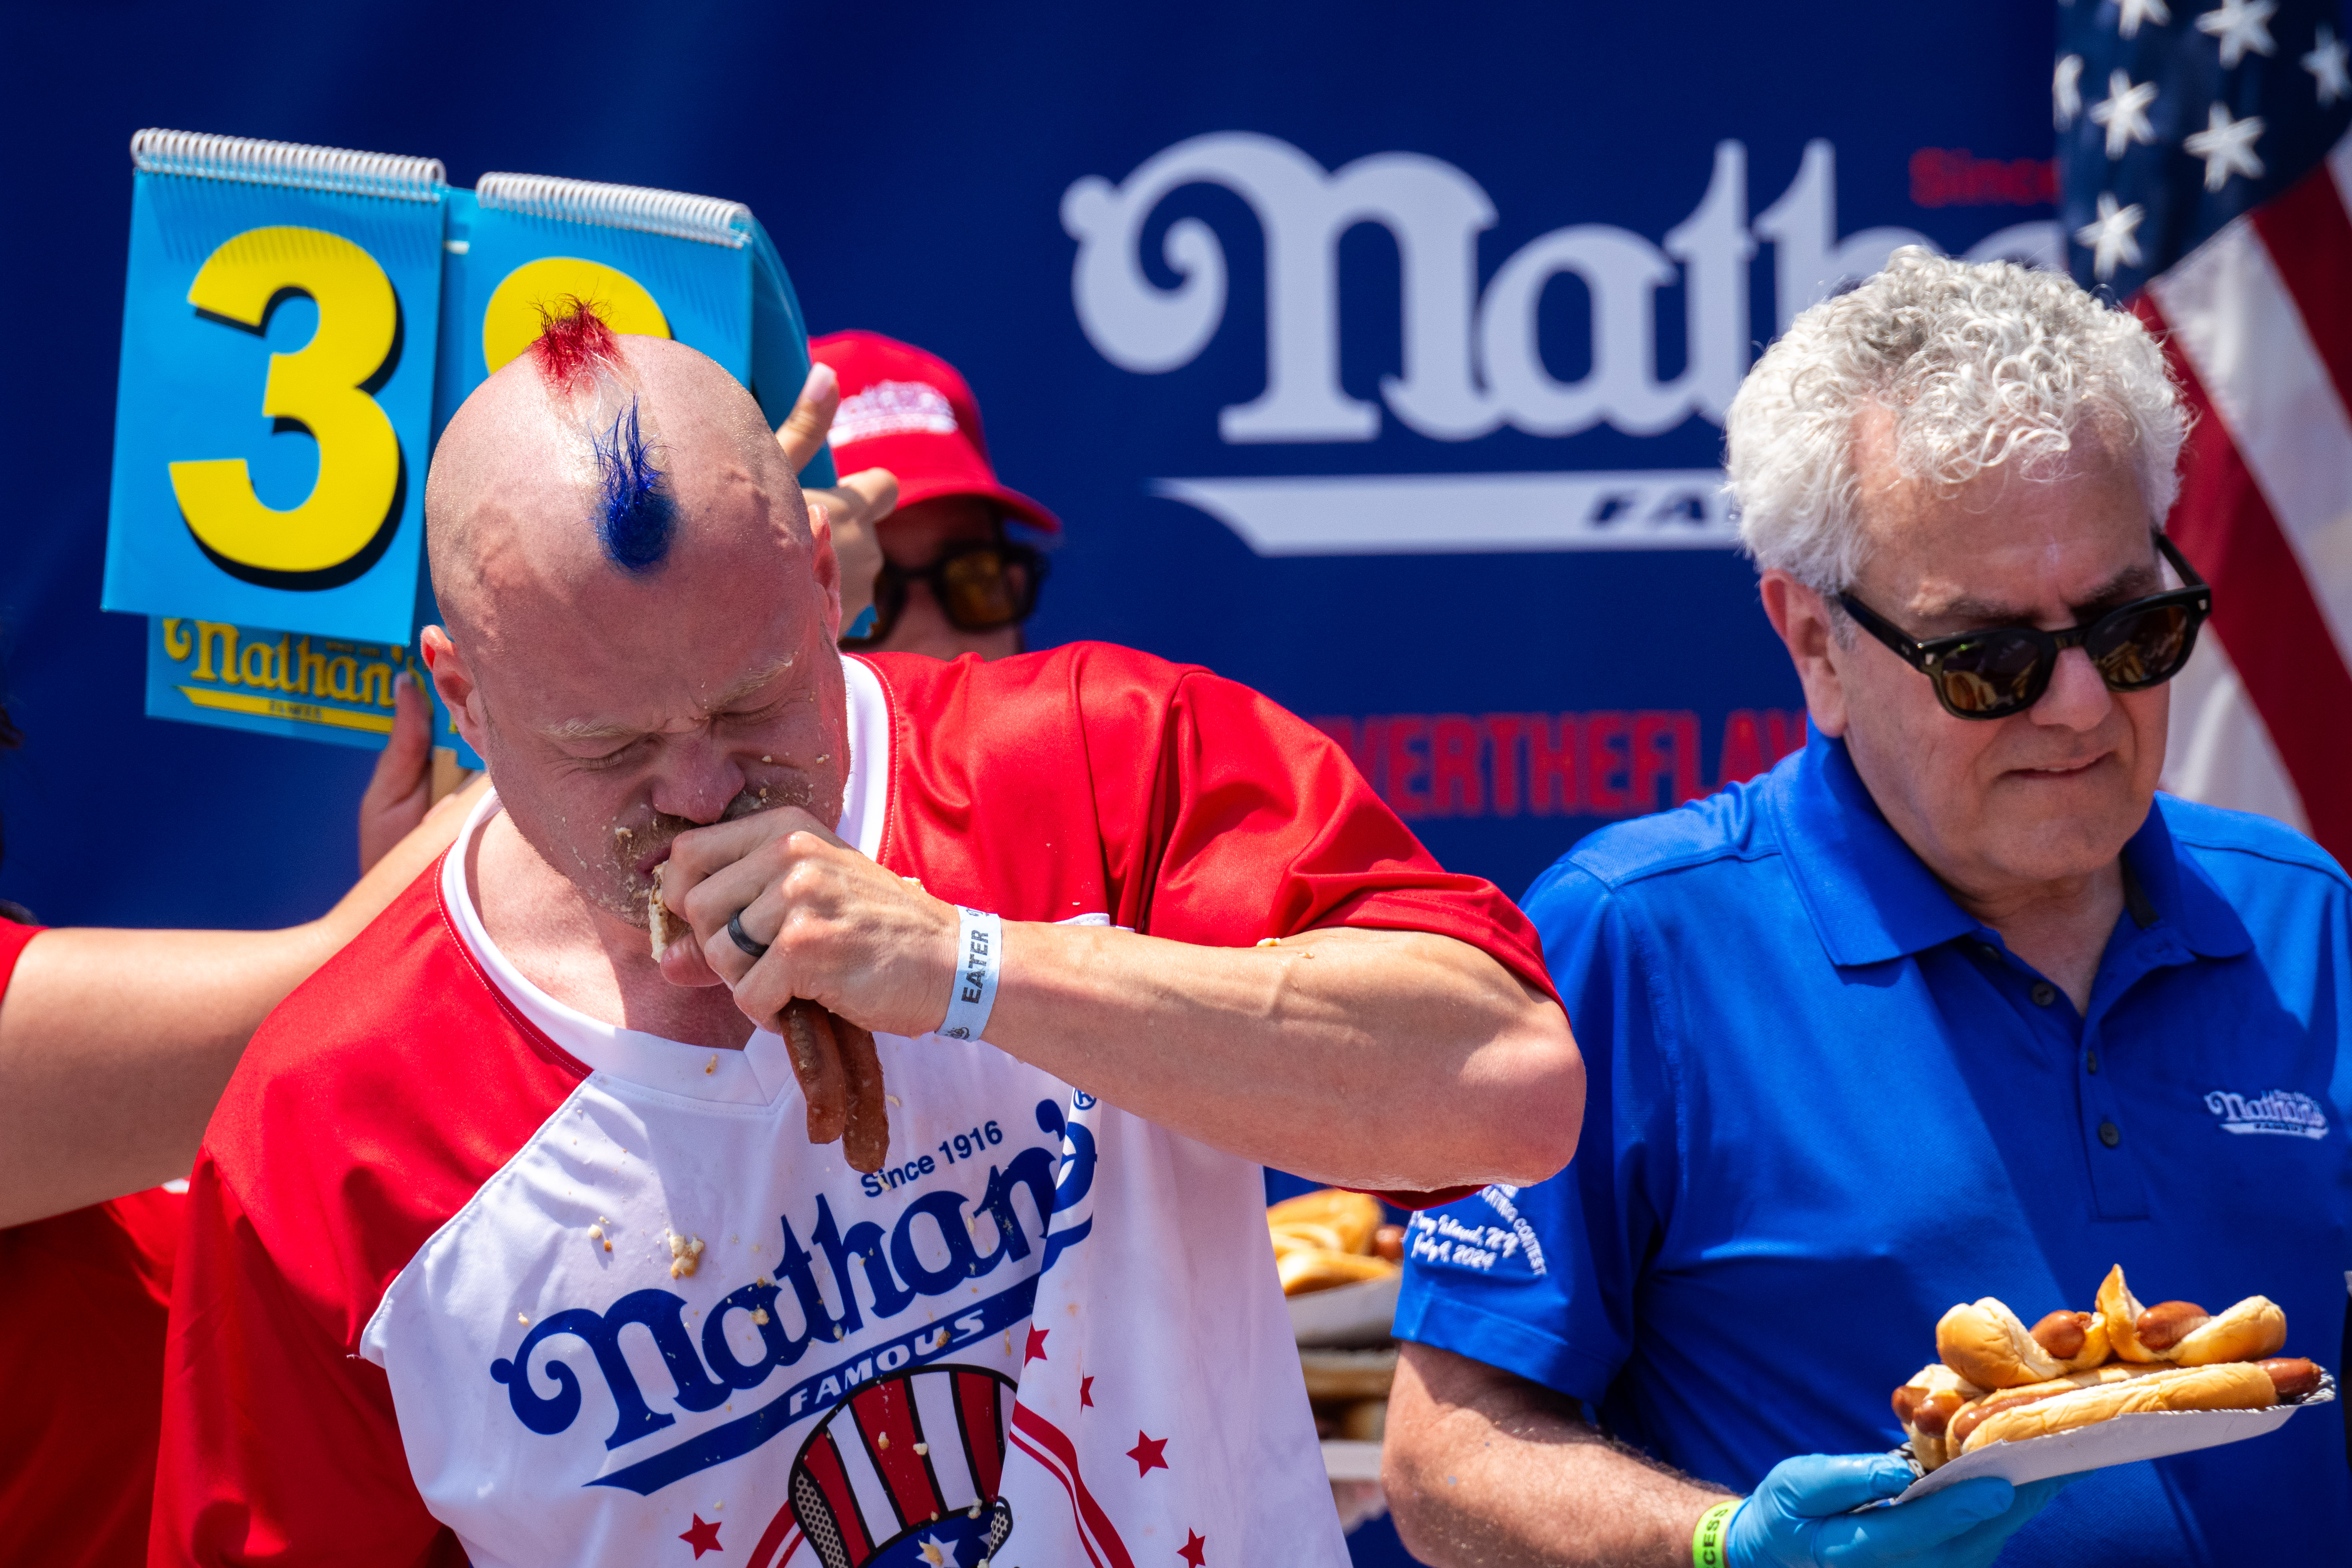 NEW YORK, NEW YORK - JULY 4: Participants compete for the mens title at Nathan's Annual Hot Dog Eating Contest on July 4, 2024 in New York City. Sixteen-time winner Joey Chestnut is banned from this year's contest due to his partnership with Nathan's competitor Impossible Foods, which sells plant-based hot dogs. (Photo by Adam Gray/Getty Images)